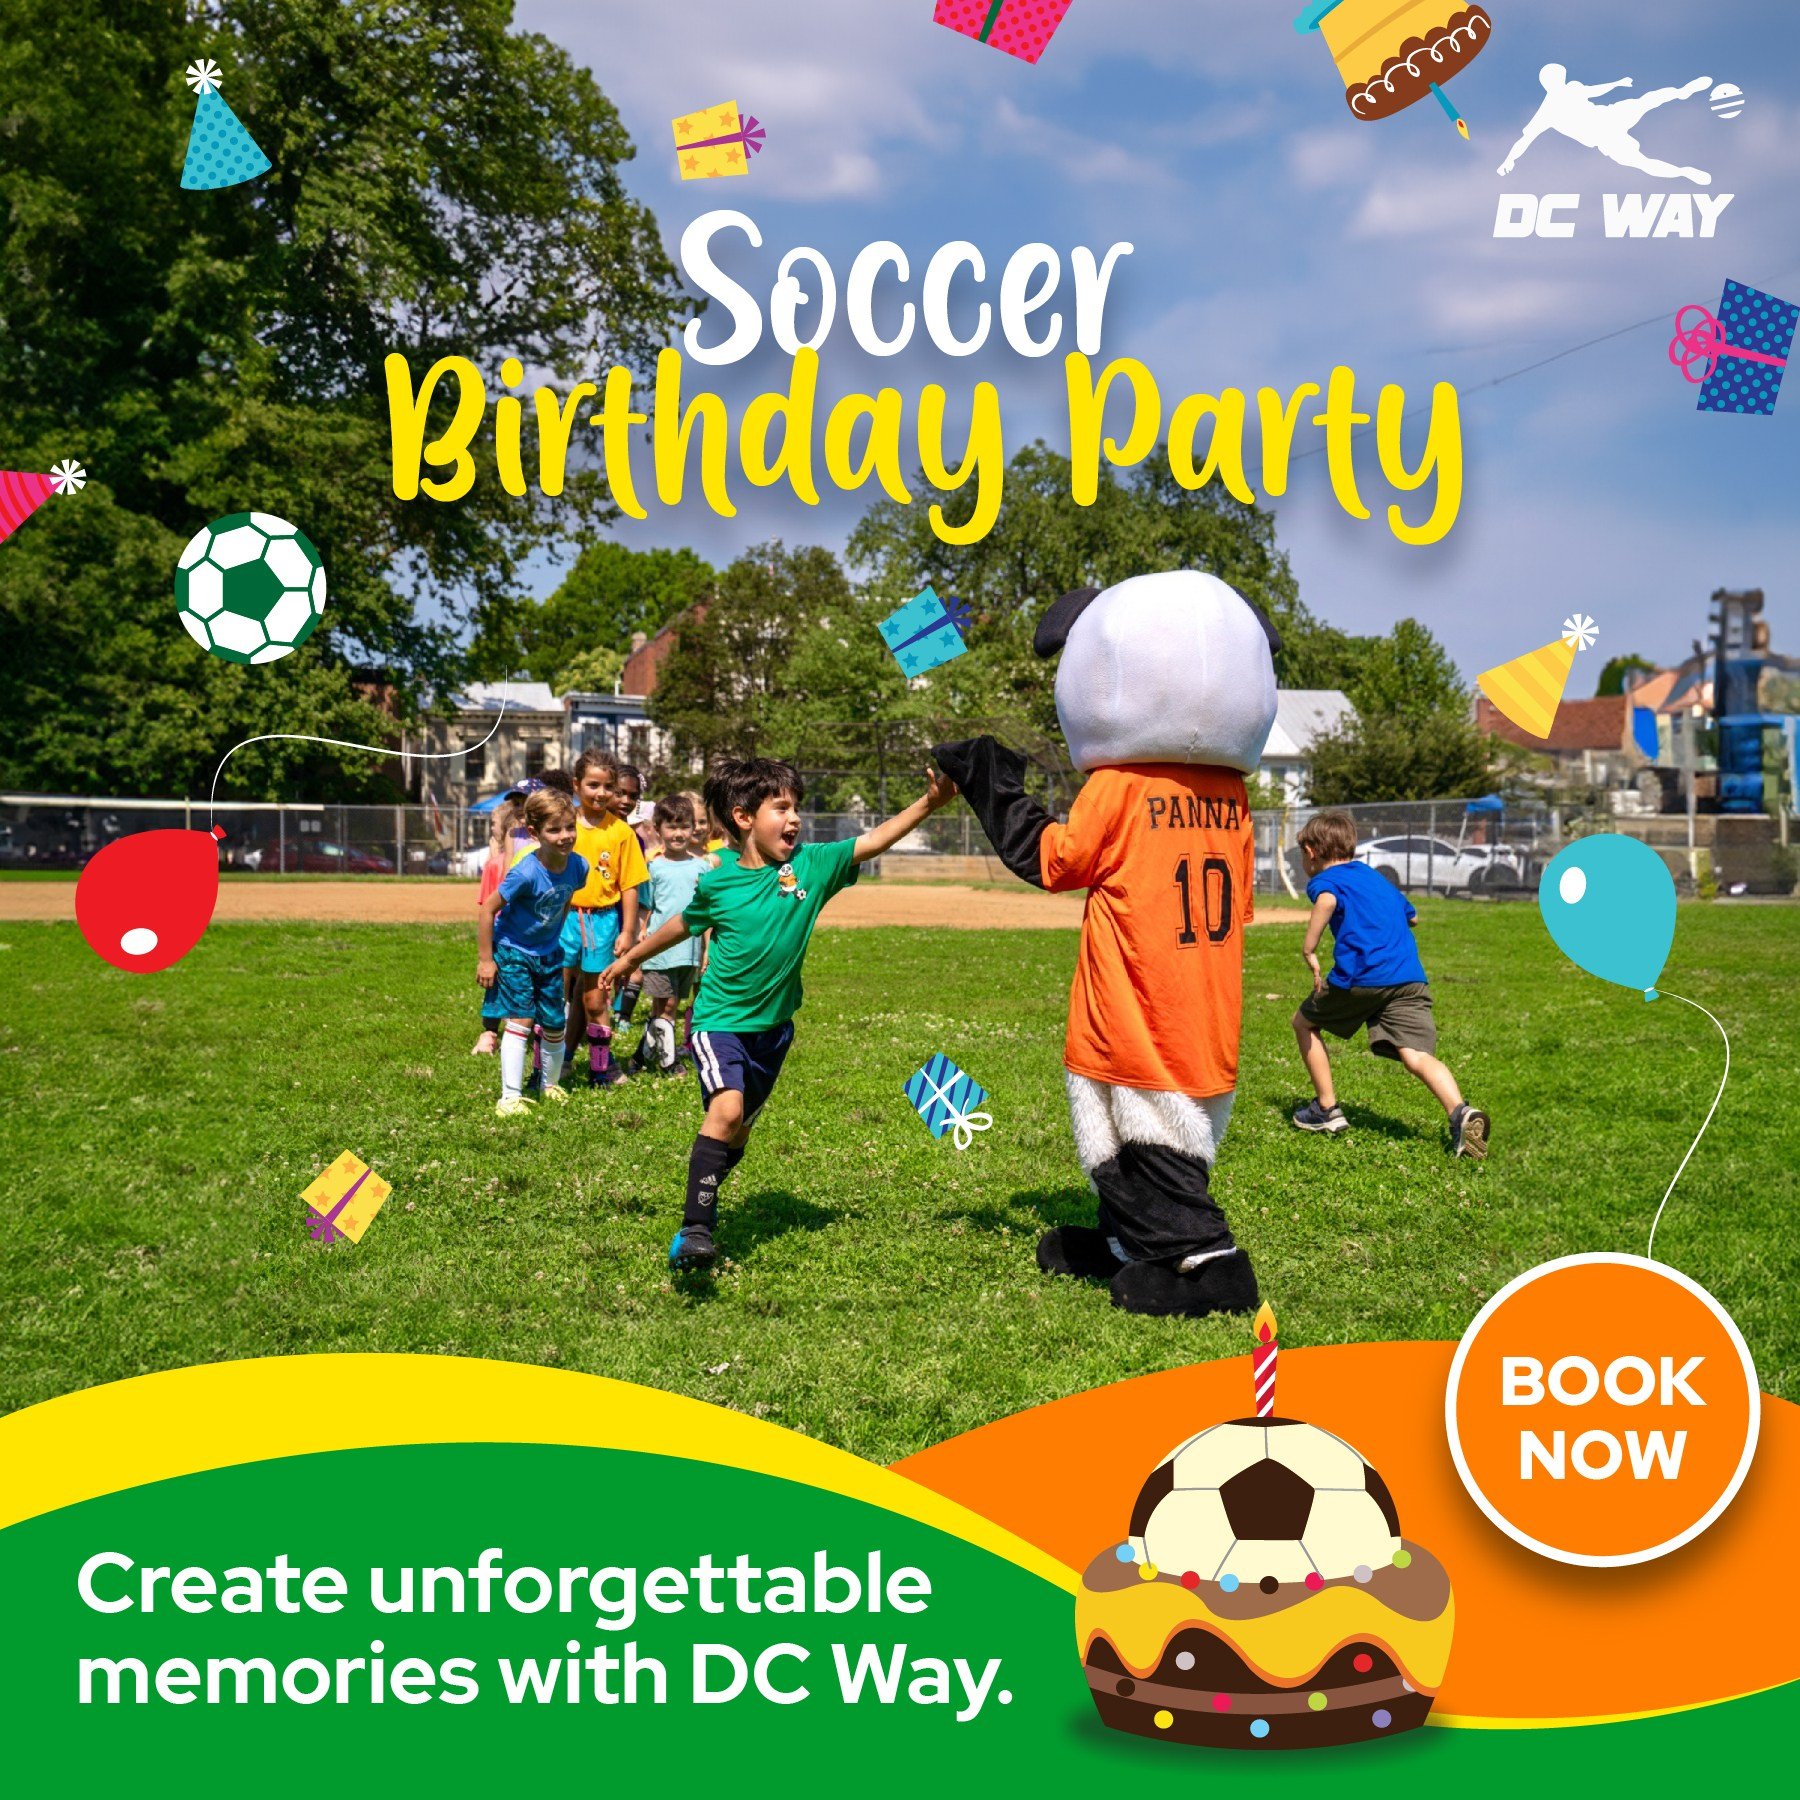 Why settle for an ordinary birthday party when you can create unforgettable memories with DC Way? 🐼🧡🥳
 
When you invite DC Way to your child's birthday, you can expect a party experience like no other. Our team will bring along fun birthday gifts 